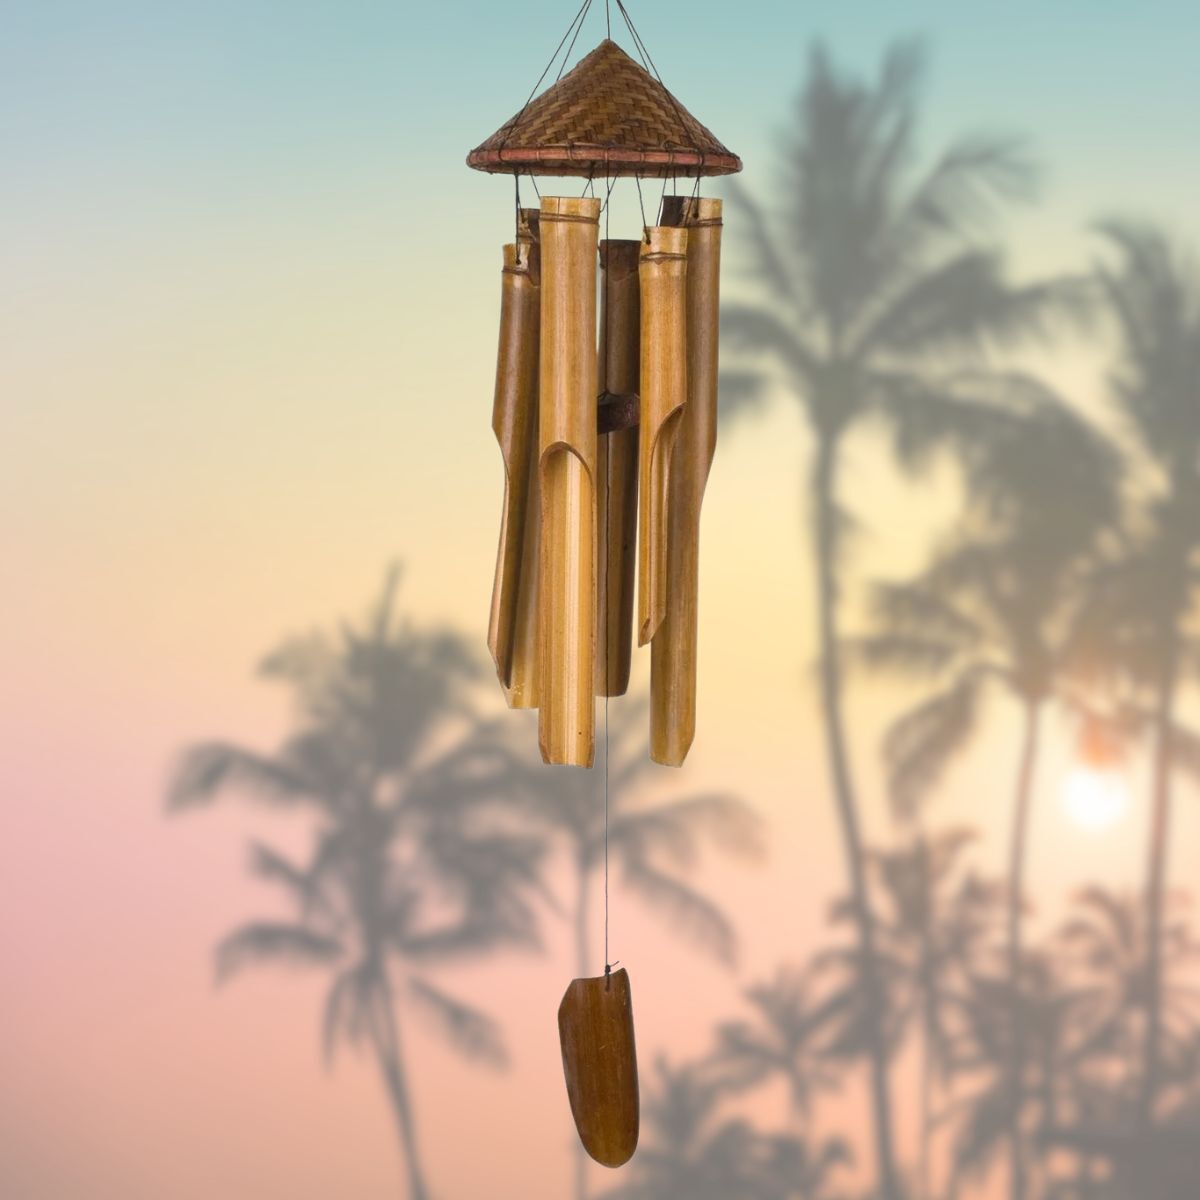 Woodstock Percussion 34 Inch Woven Hat Bamboo Wind Chimes